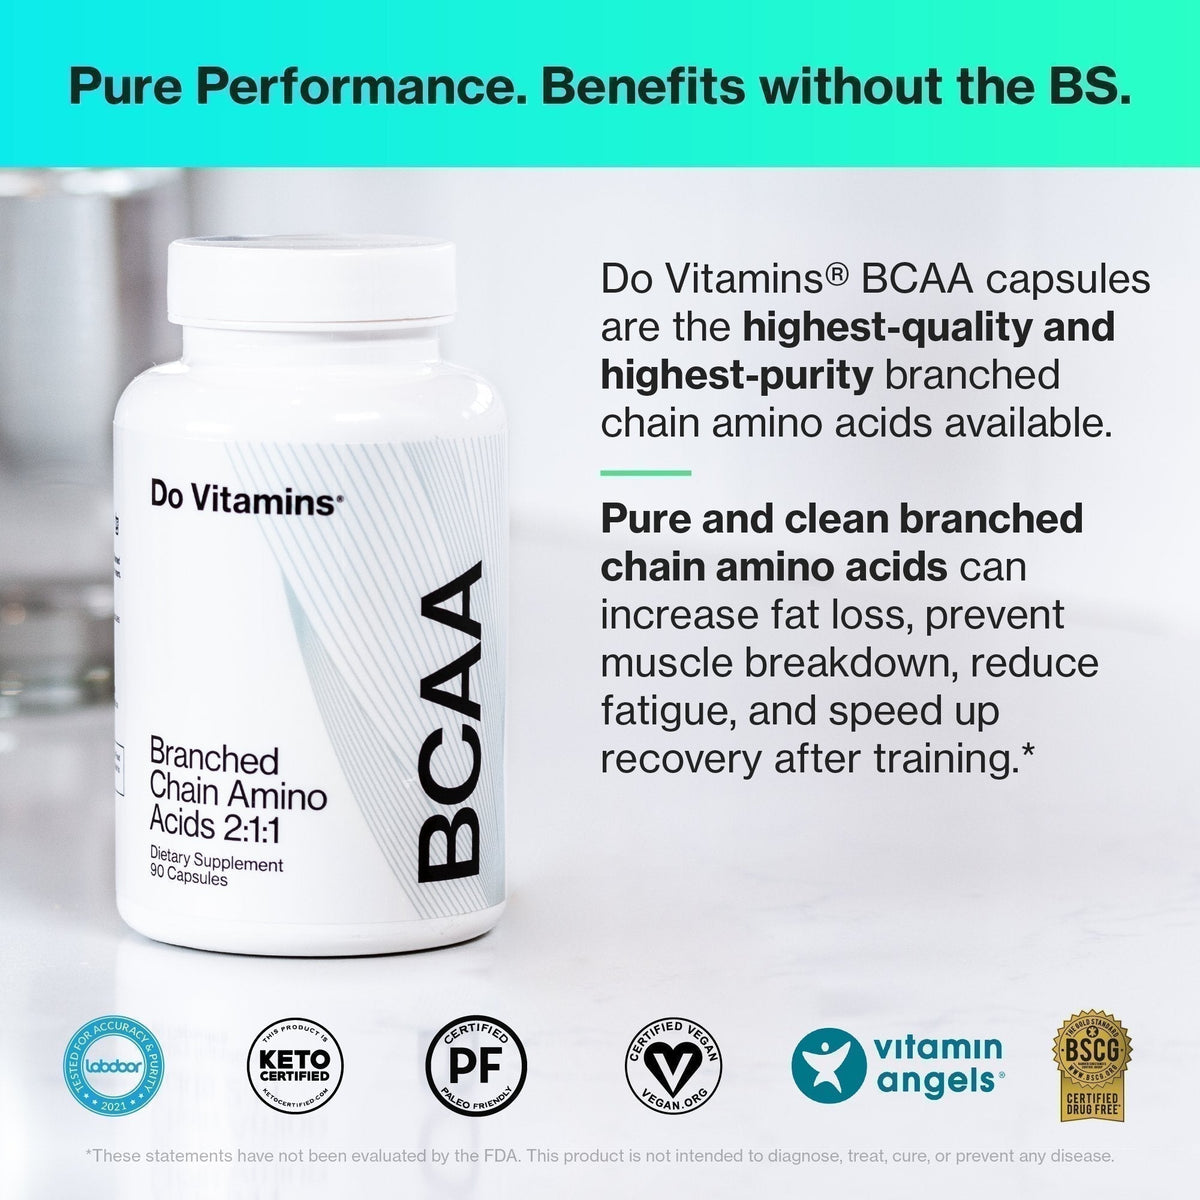 Branched Chain Amino Acids - BCAA Capsules